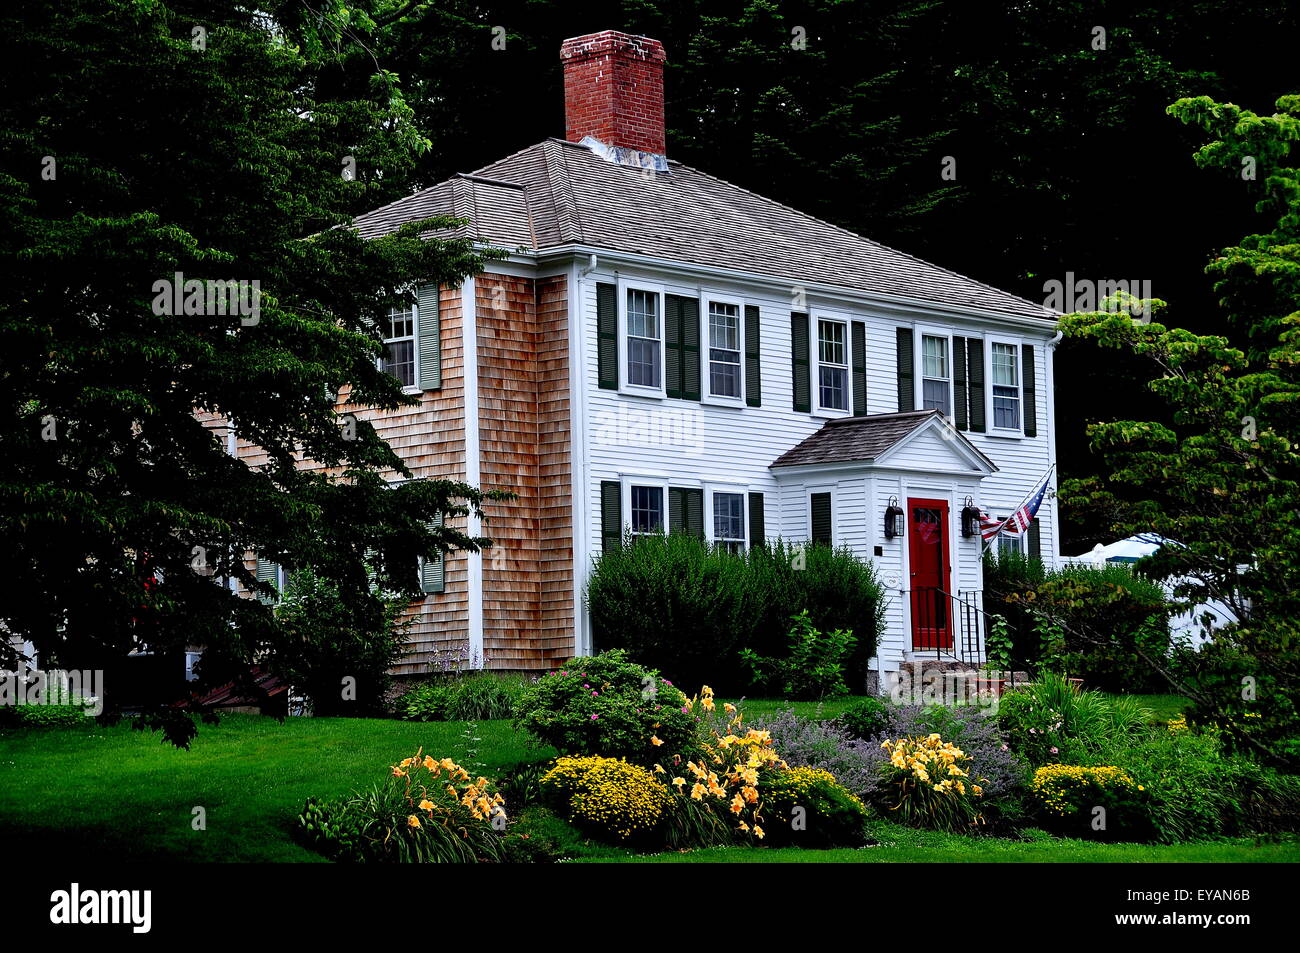 Sandwich, Massachusetts:  Handsome c. 1750 colonial home with hip roof, center chimney, Summer and flower gardens Stock Photo